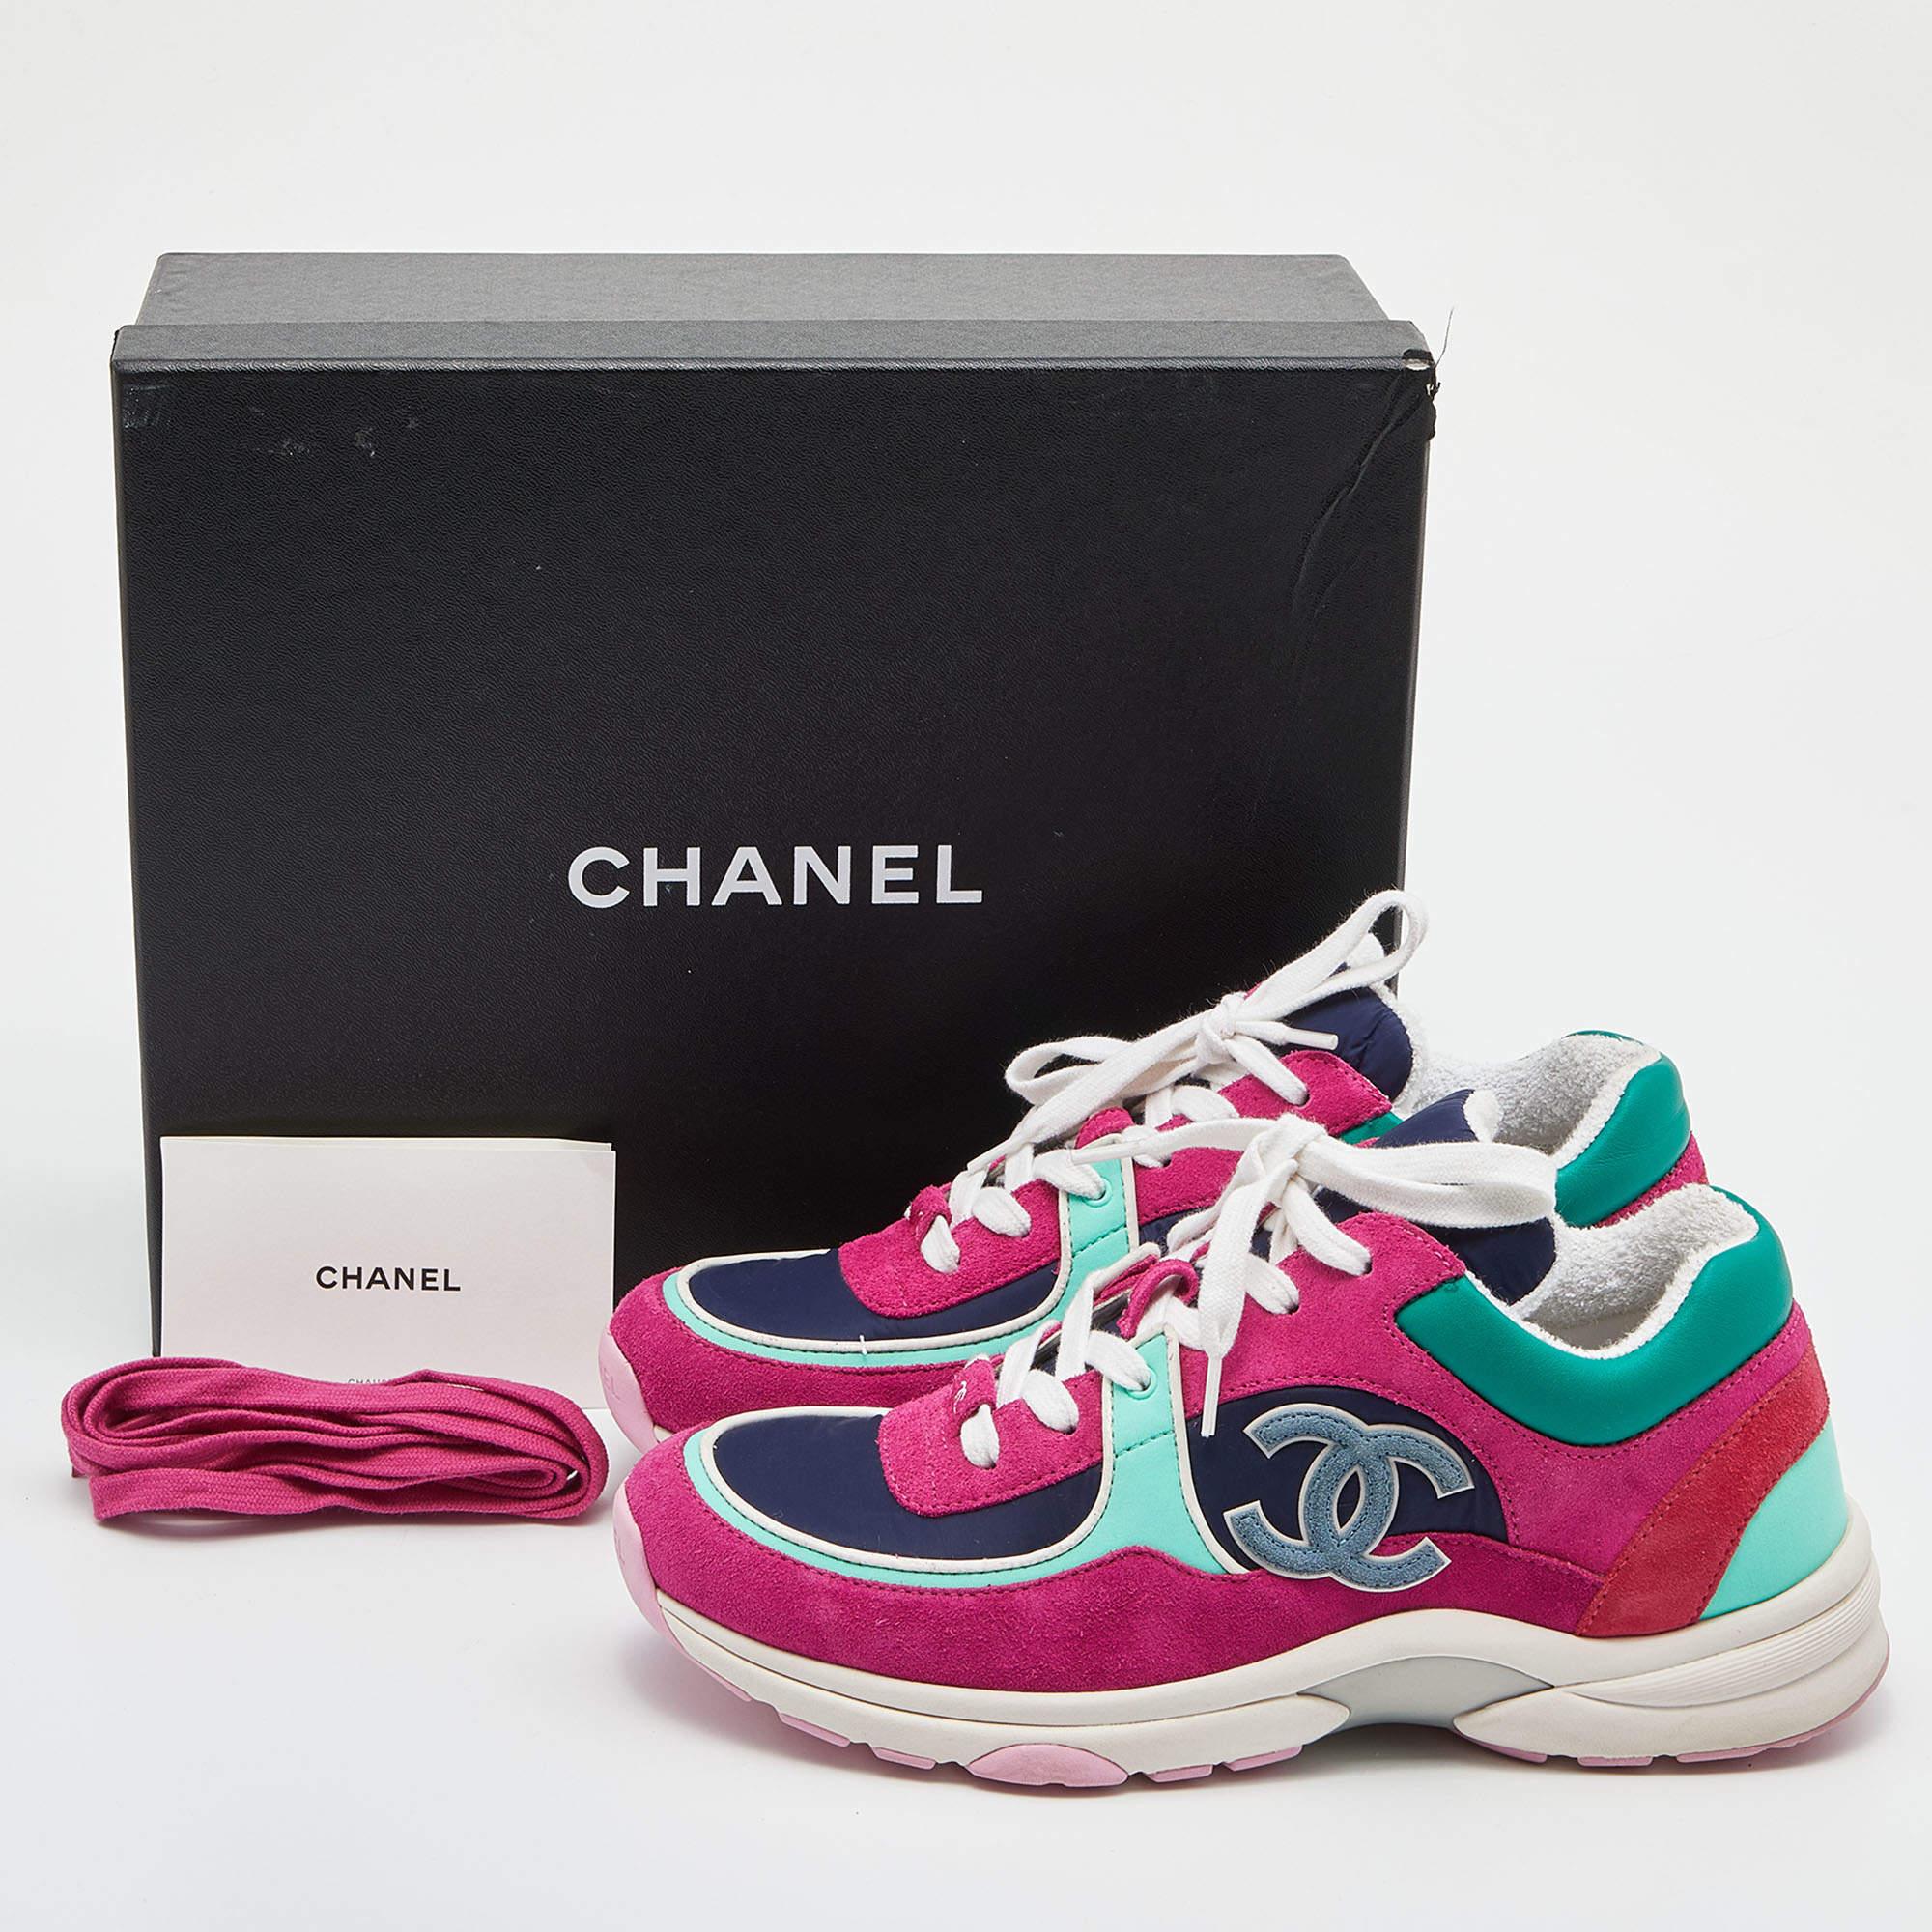 Chanel Multicolor Leather, Satin and Suede Low Top CC Sneakers Size 39 1